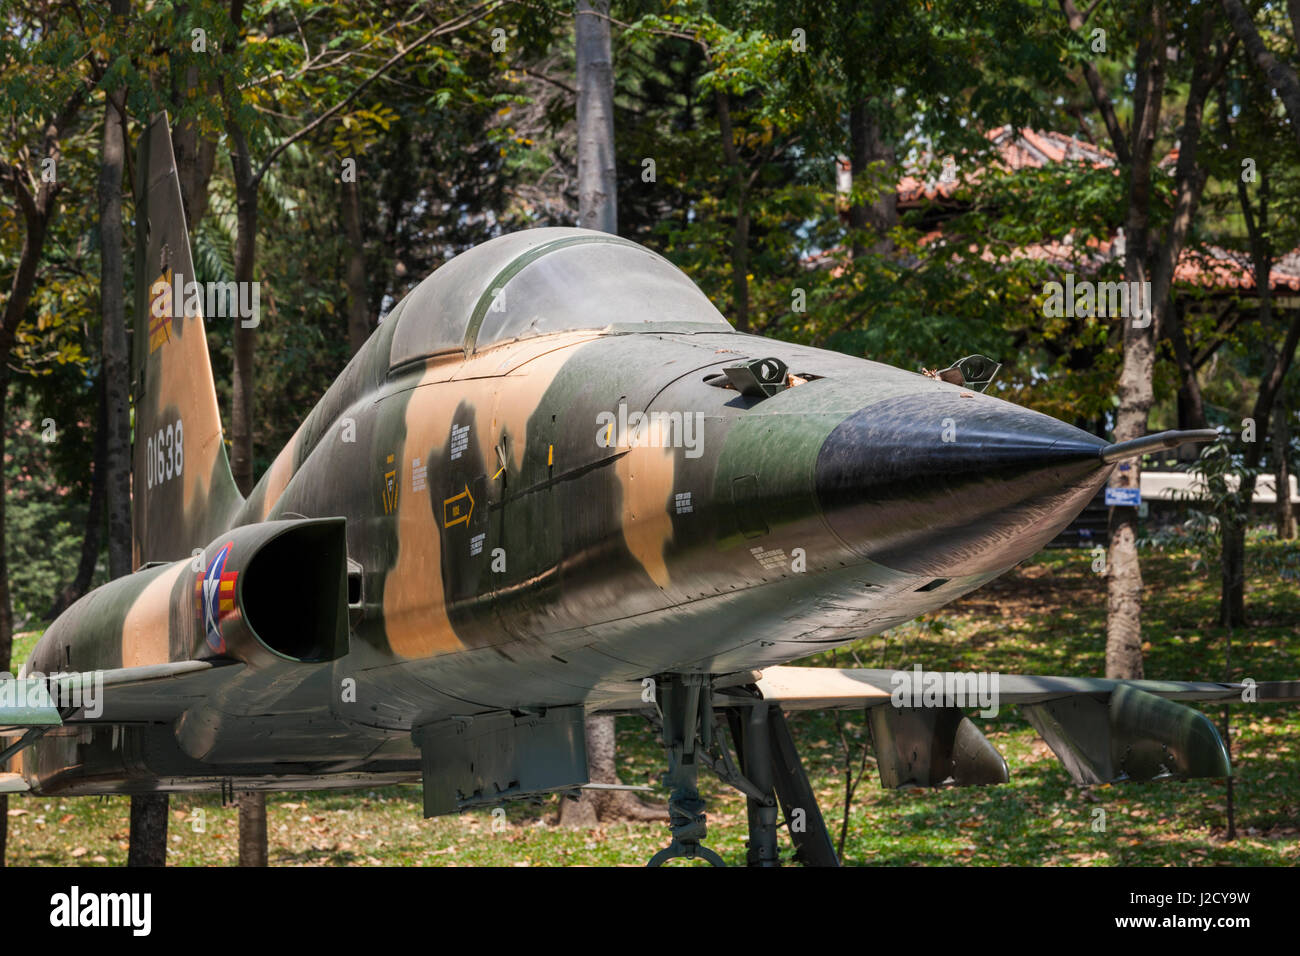 Vietnam, Ho Chi Minh City. Reunification Palace, former seat of South Vietnamese Government, Former South Vietnamese F-5E fighter plane used to bomb the palace at the end of the Vietnam War Stock Photo